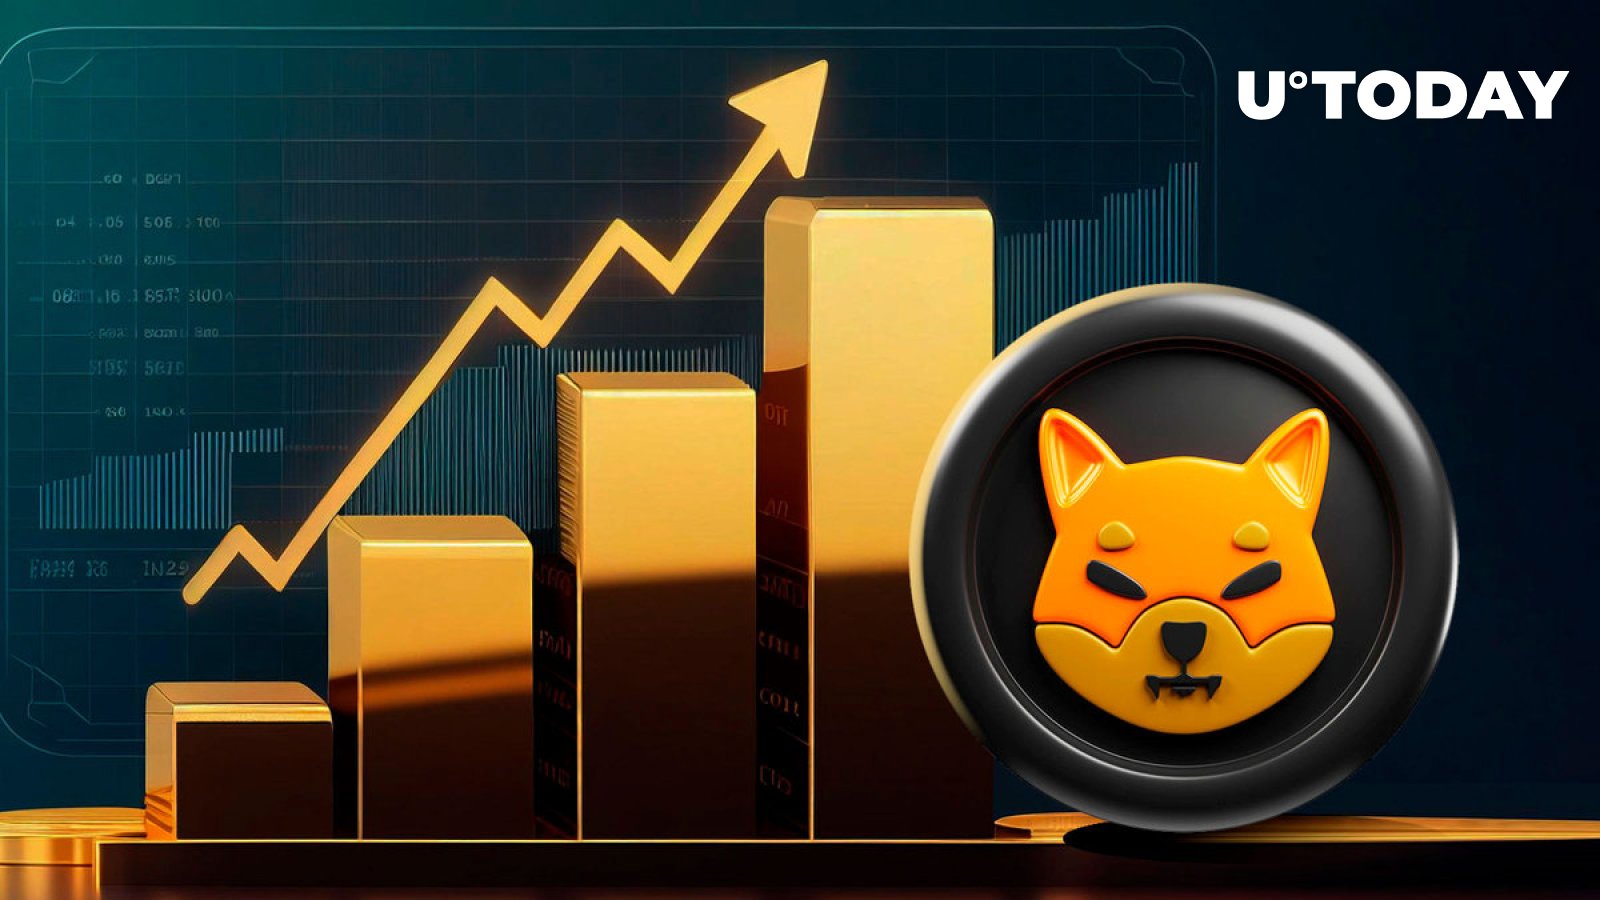 Shiba Inu (SHIB) Active Addresses up 17%, Can It Drive Recovery?